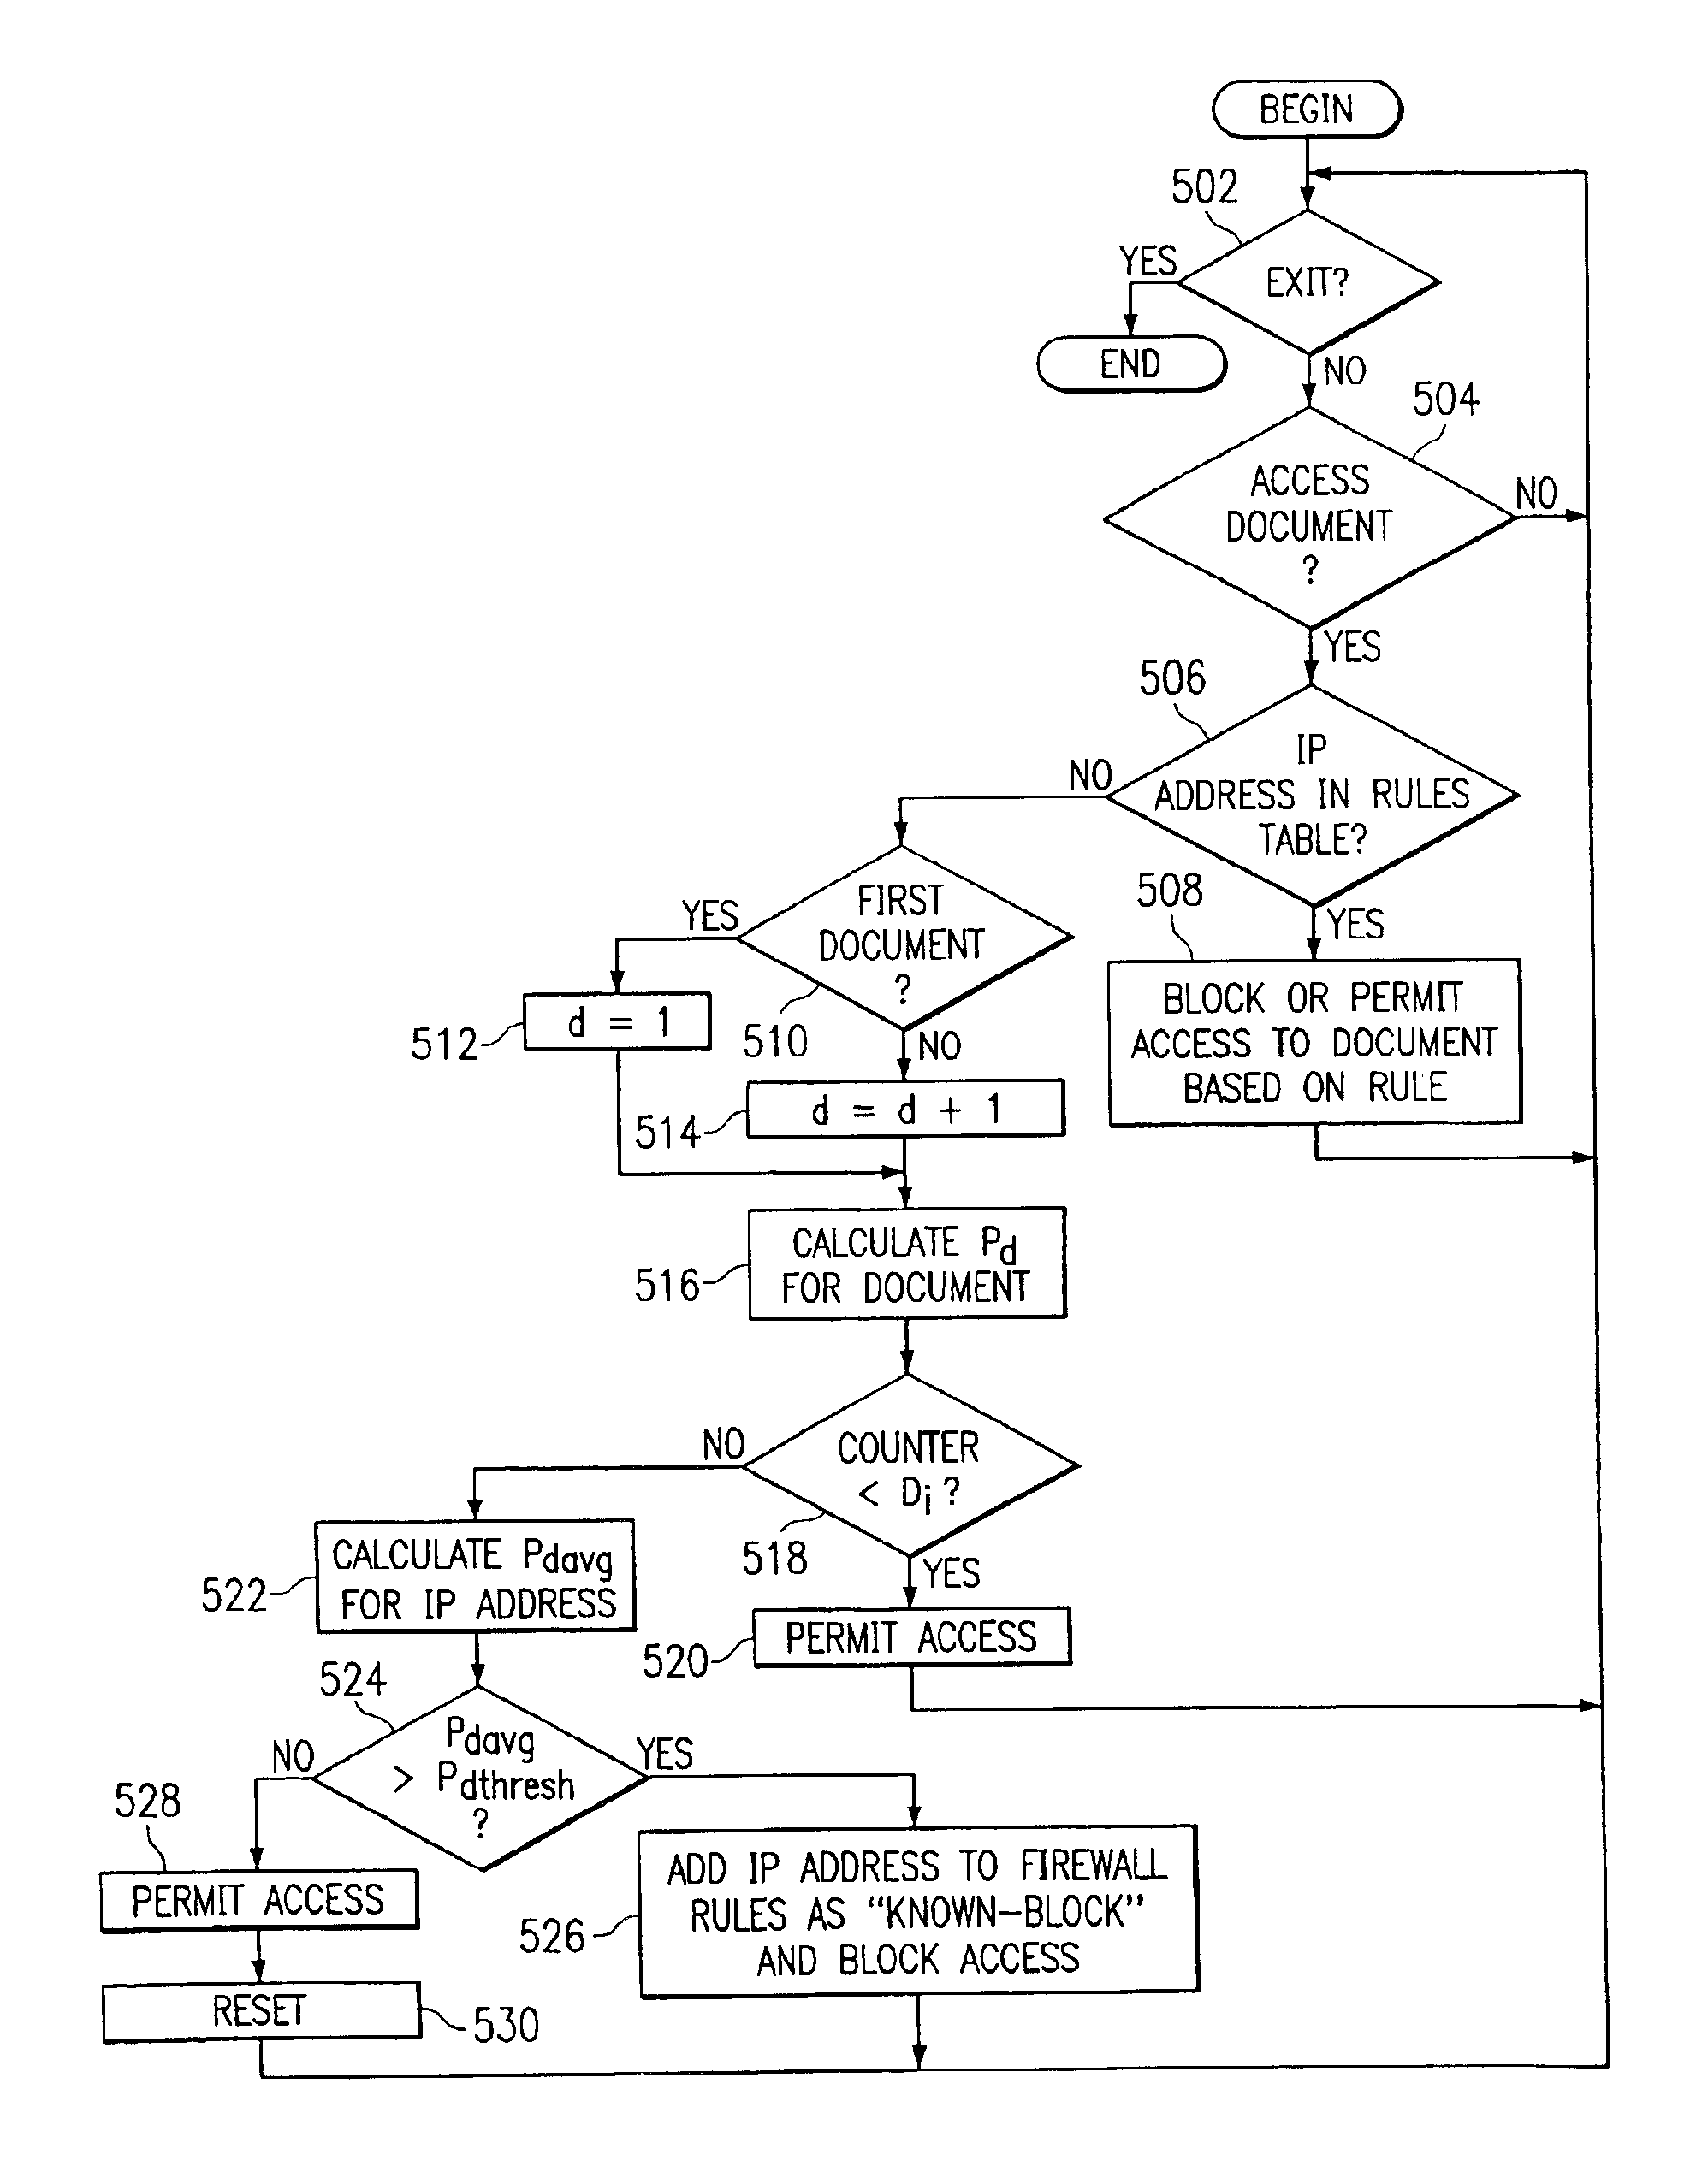 Method and apparatus for dynamic modification of internet firewalls using variably-weighted text rules